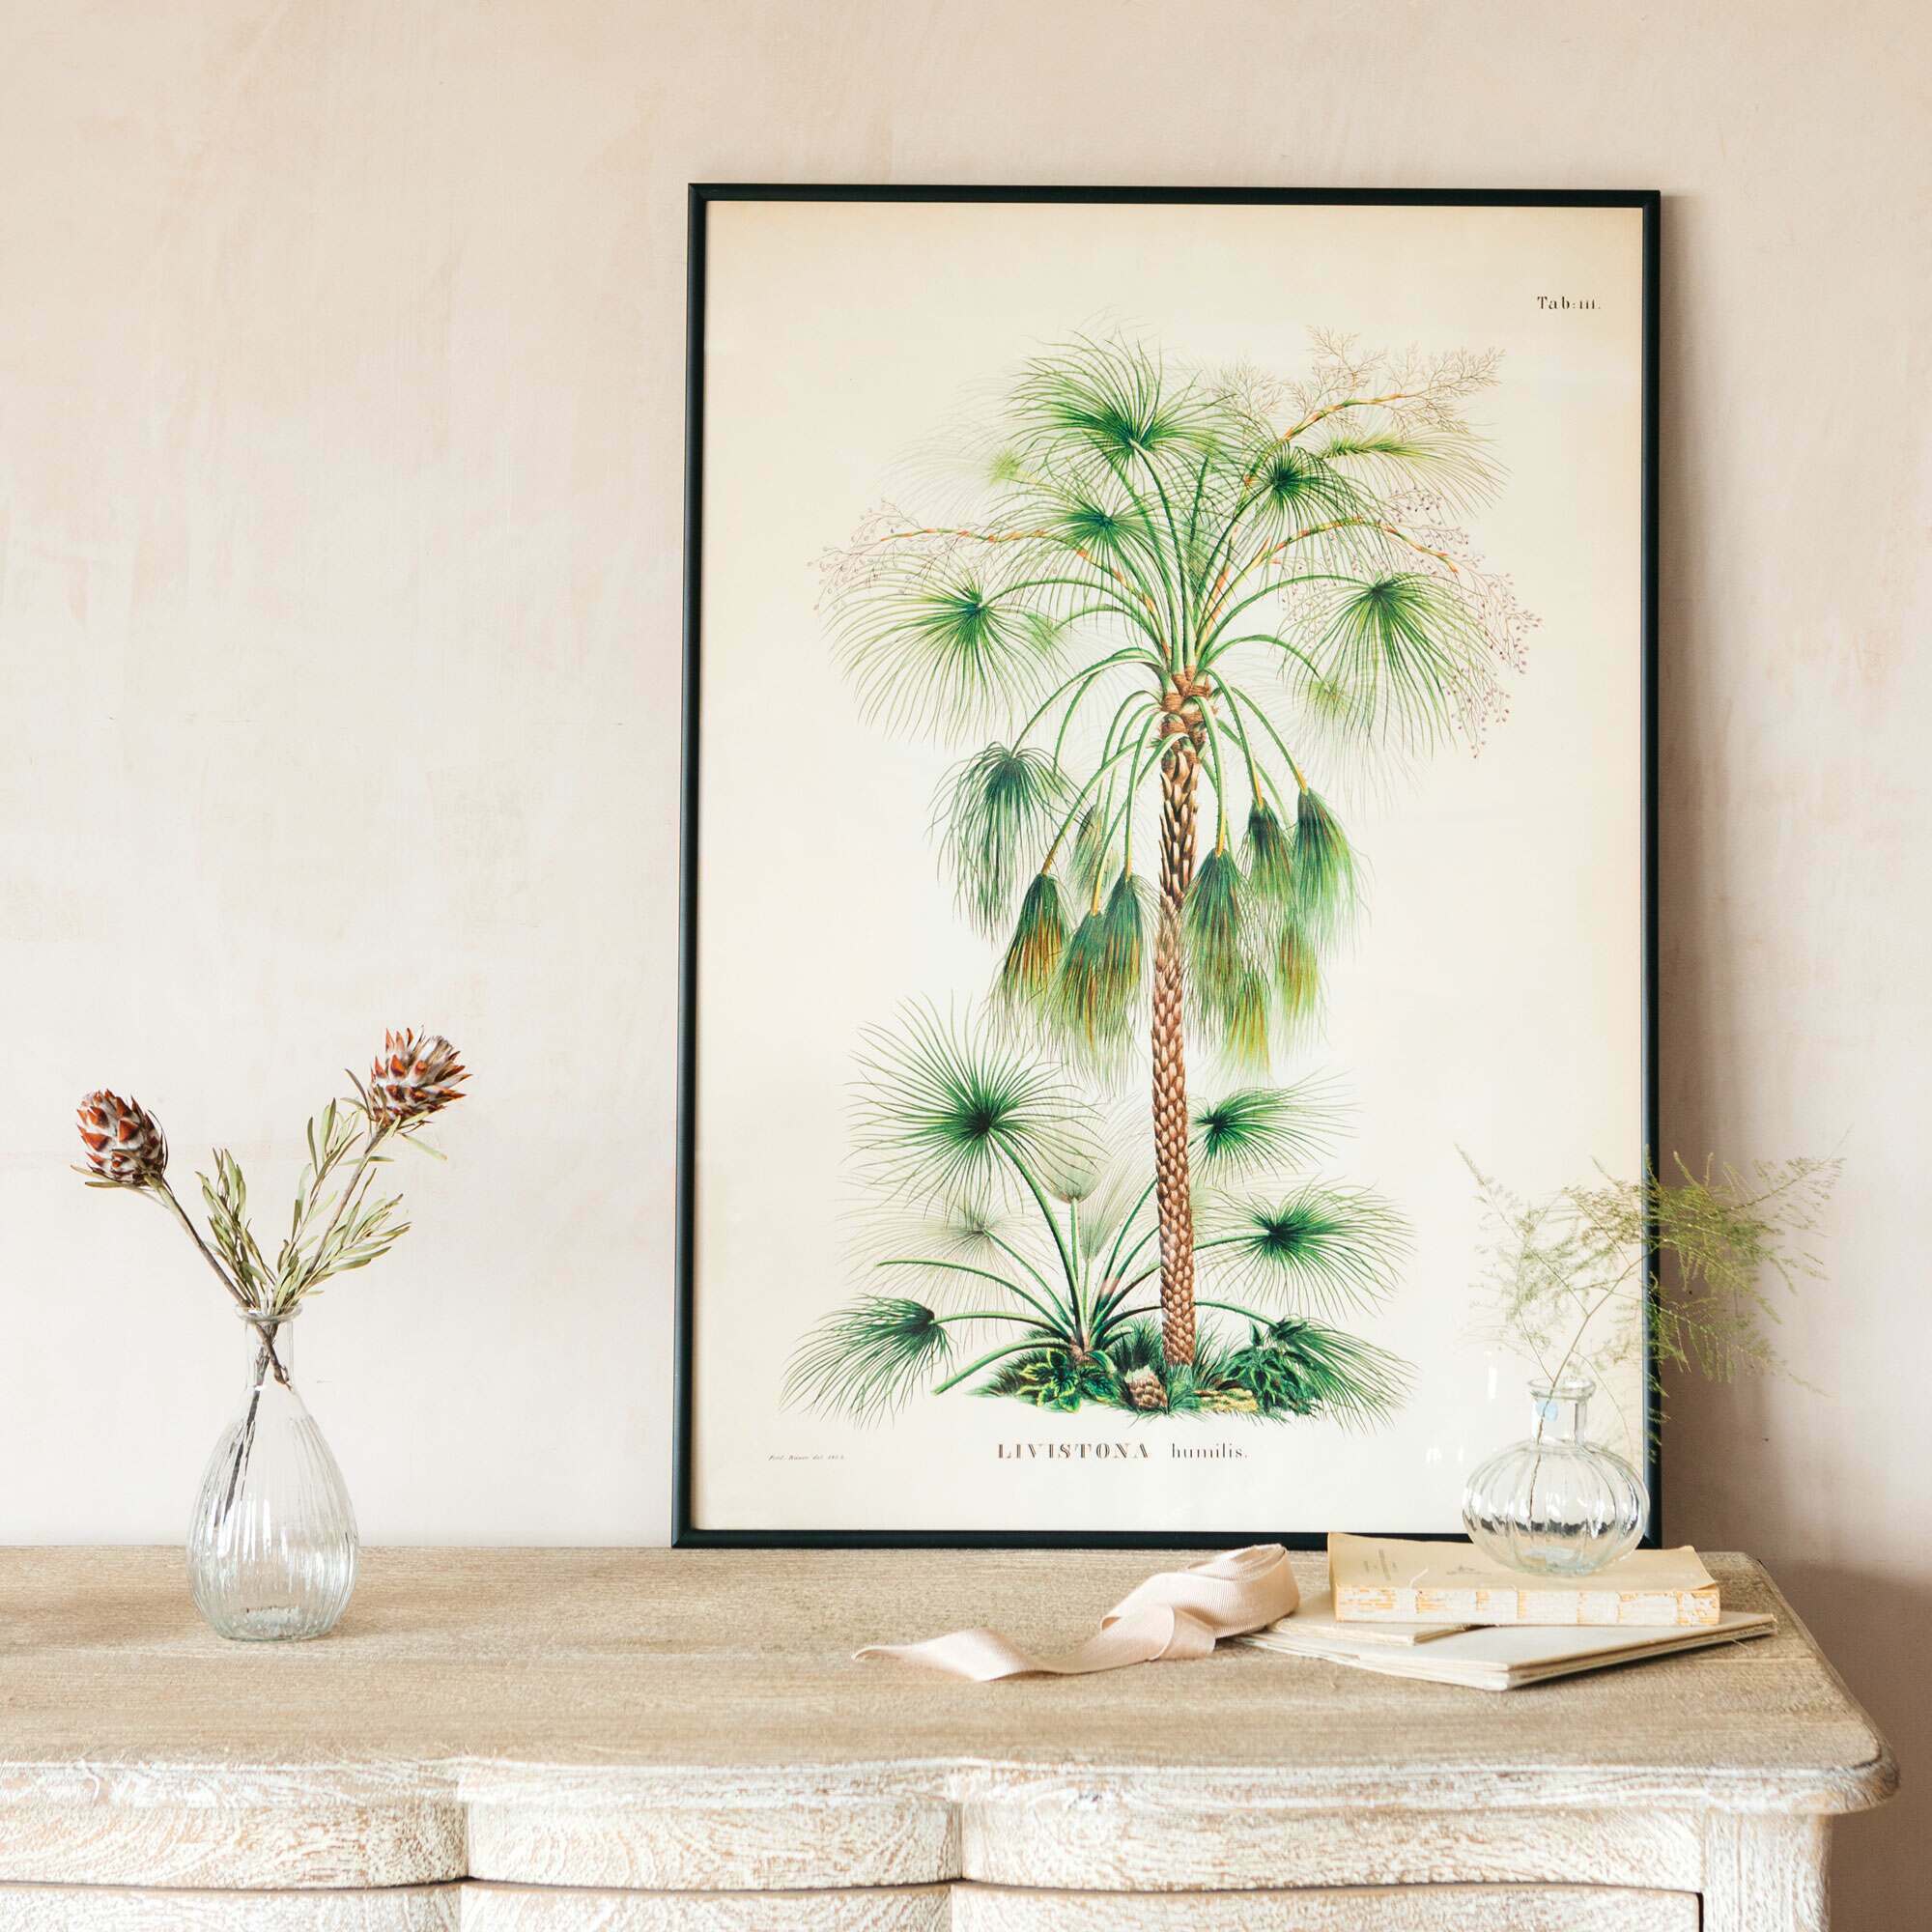 Read more about Graham and green medium framed exotic palm print